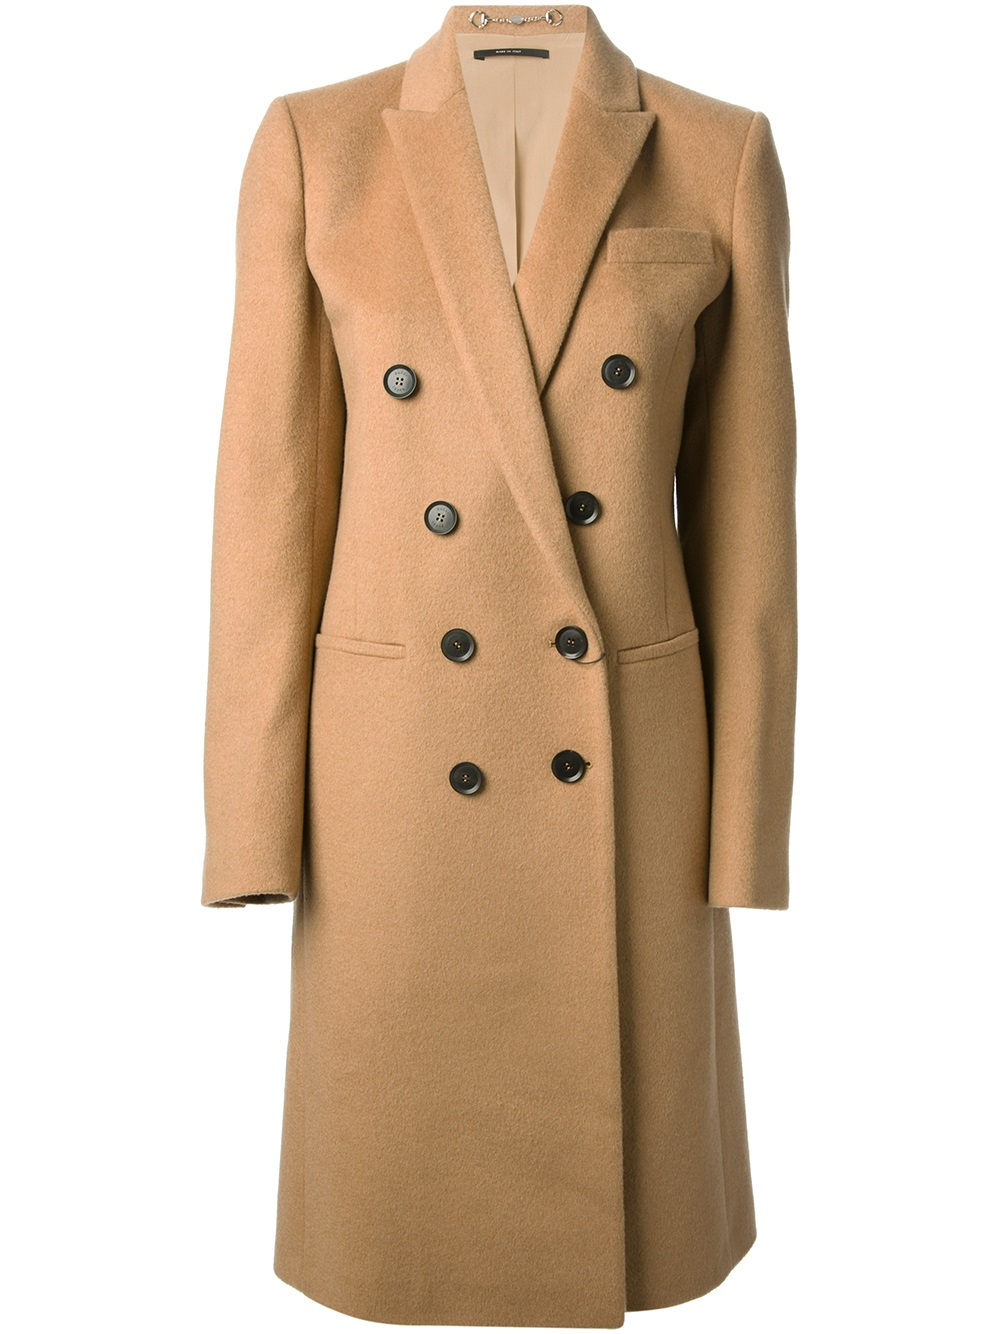 Lyst - Gucci Double Breasted Overcoat in Natural